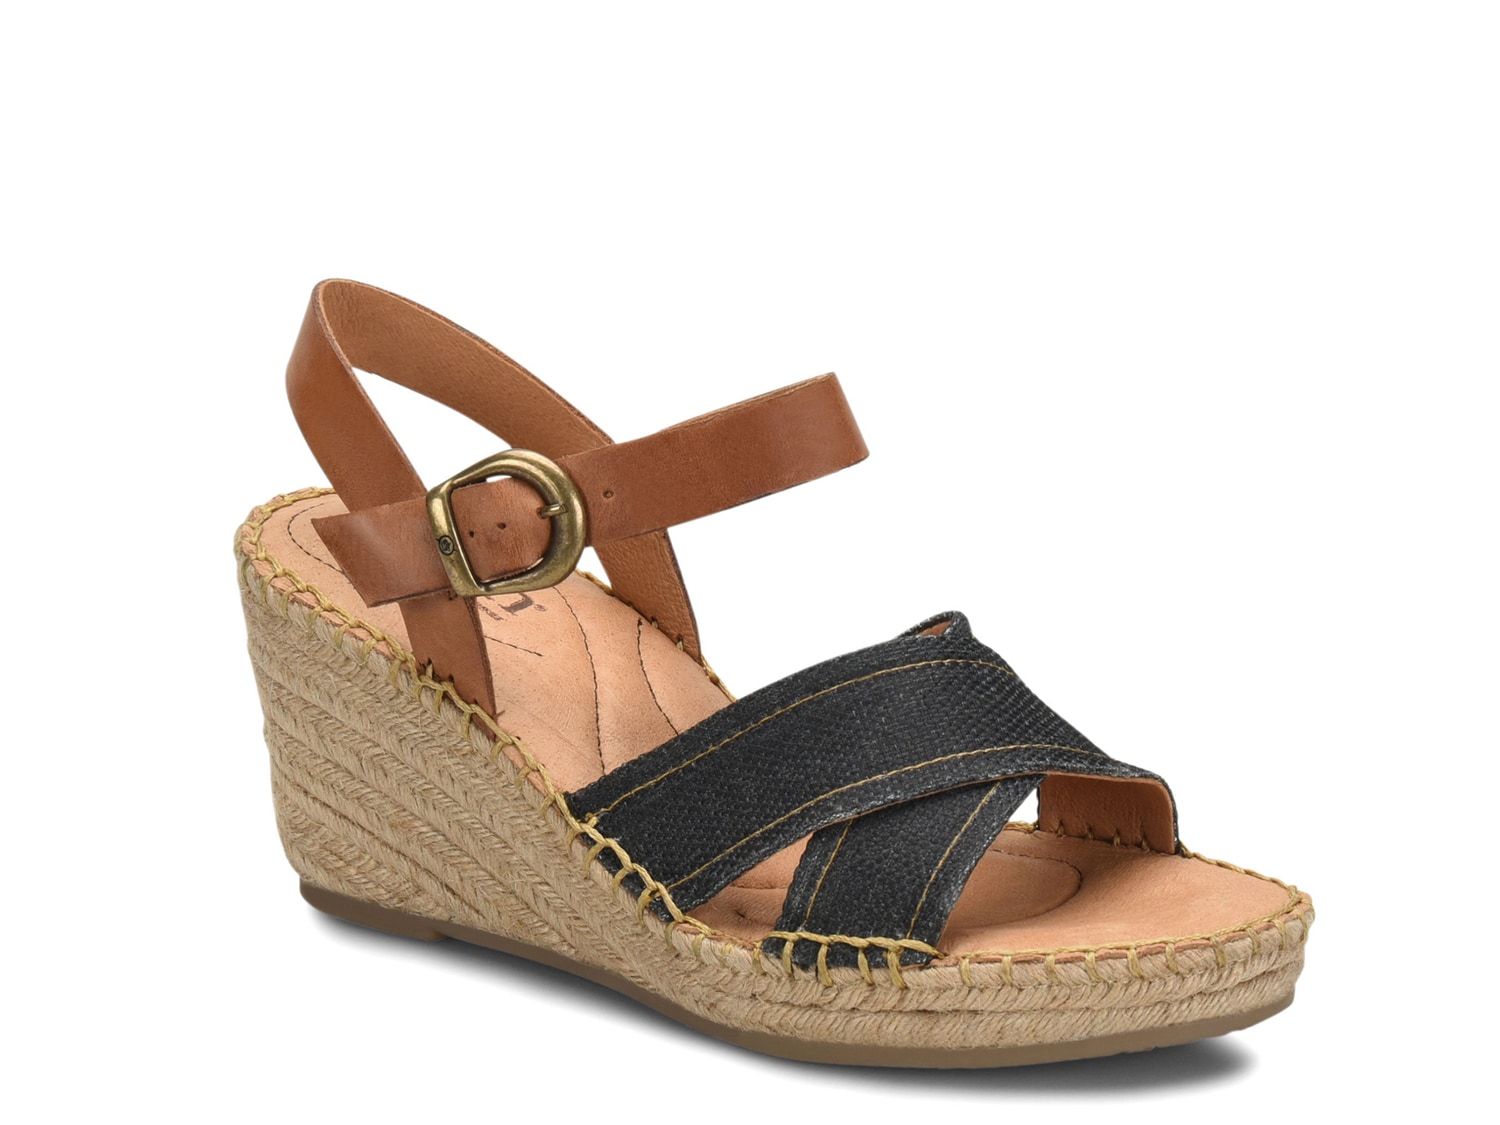 born sultry wedge sandal